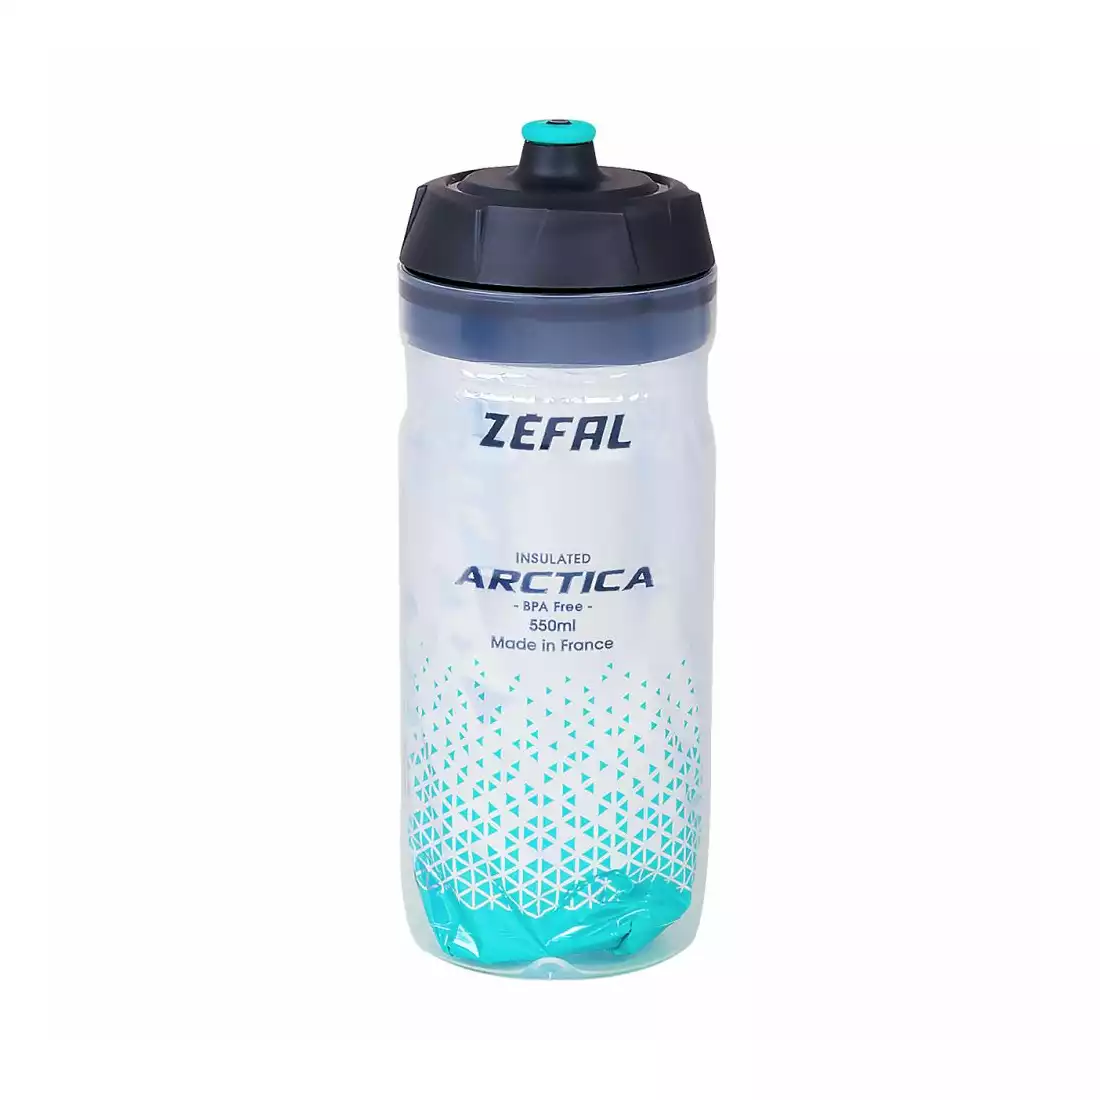 ZEFAL ARCTICA 55 Thermal bicycle bottle, silver-turquoise, 550ml 